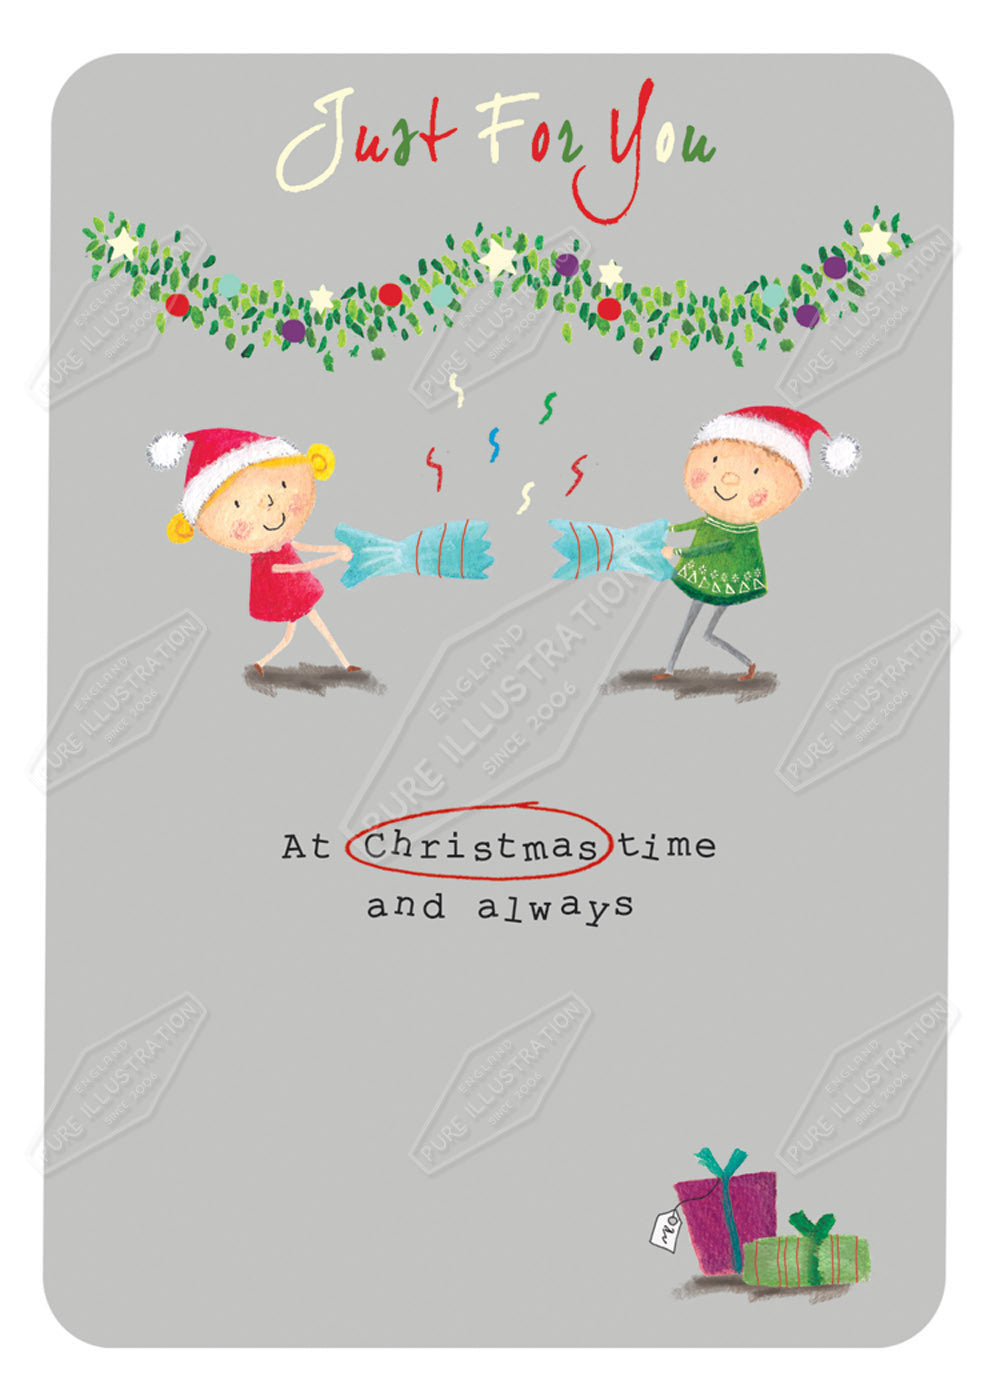 00029567CRE Christmas Elves Greeting Card Design by Cory Reid - Pure Art Licensing & Surface Design Agency